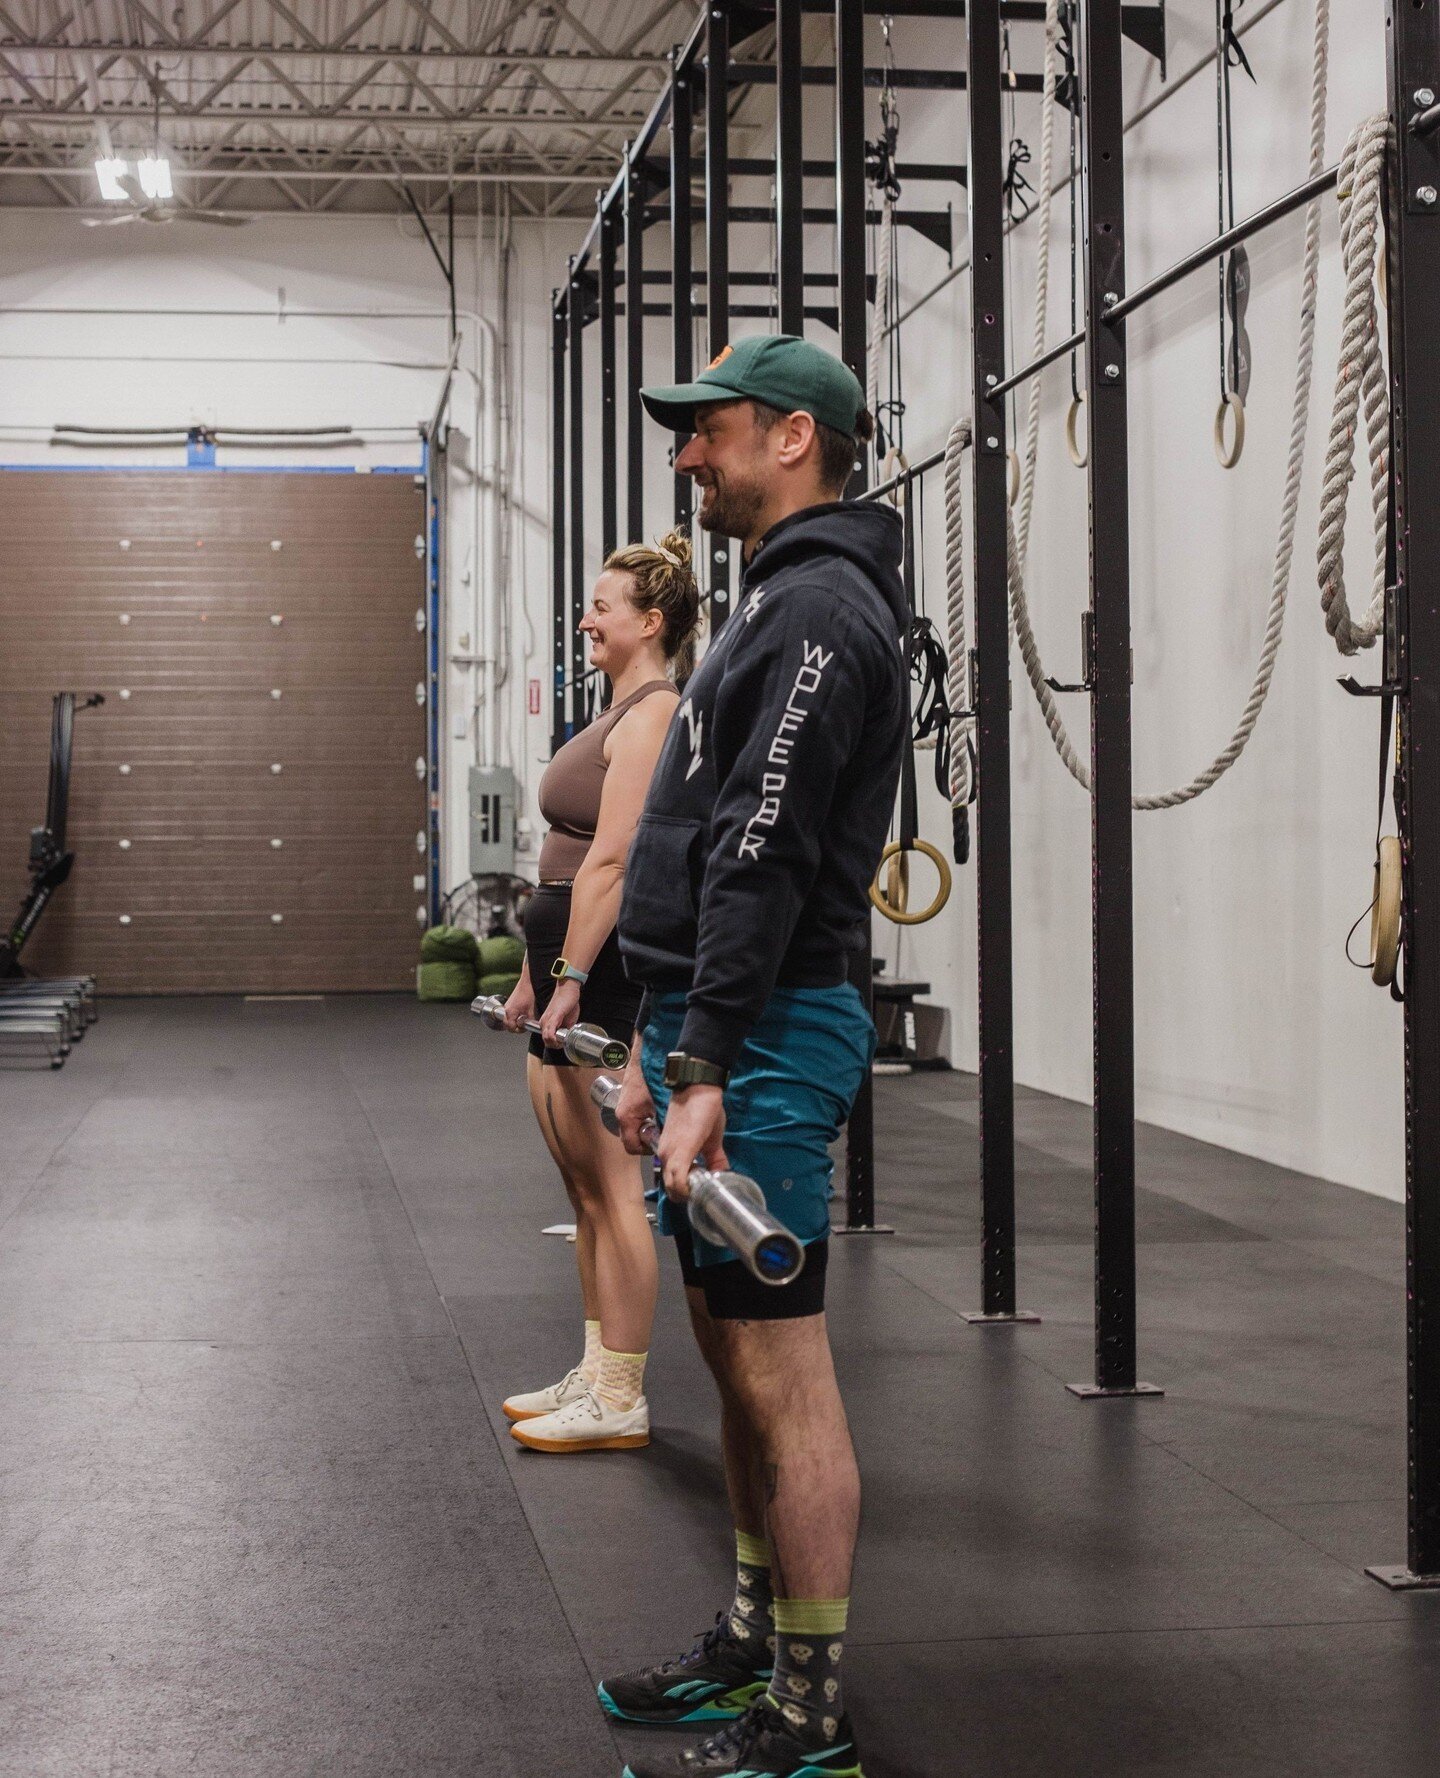 Personalized Performance Coaching!⁠👊⁠
⁠
If group classes aren't for you, check out our Elevate Performance Coaching options.⁠
⁠
These are designed to fit your lifestyle needs and goals. ⁠🫵😏⁠
⁠
Work 1-on-1 with an experienced coach for a unique pro